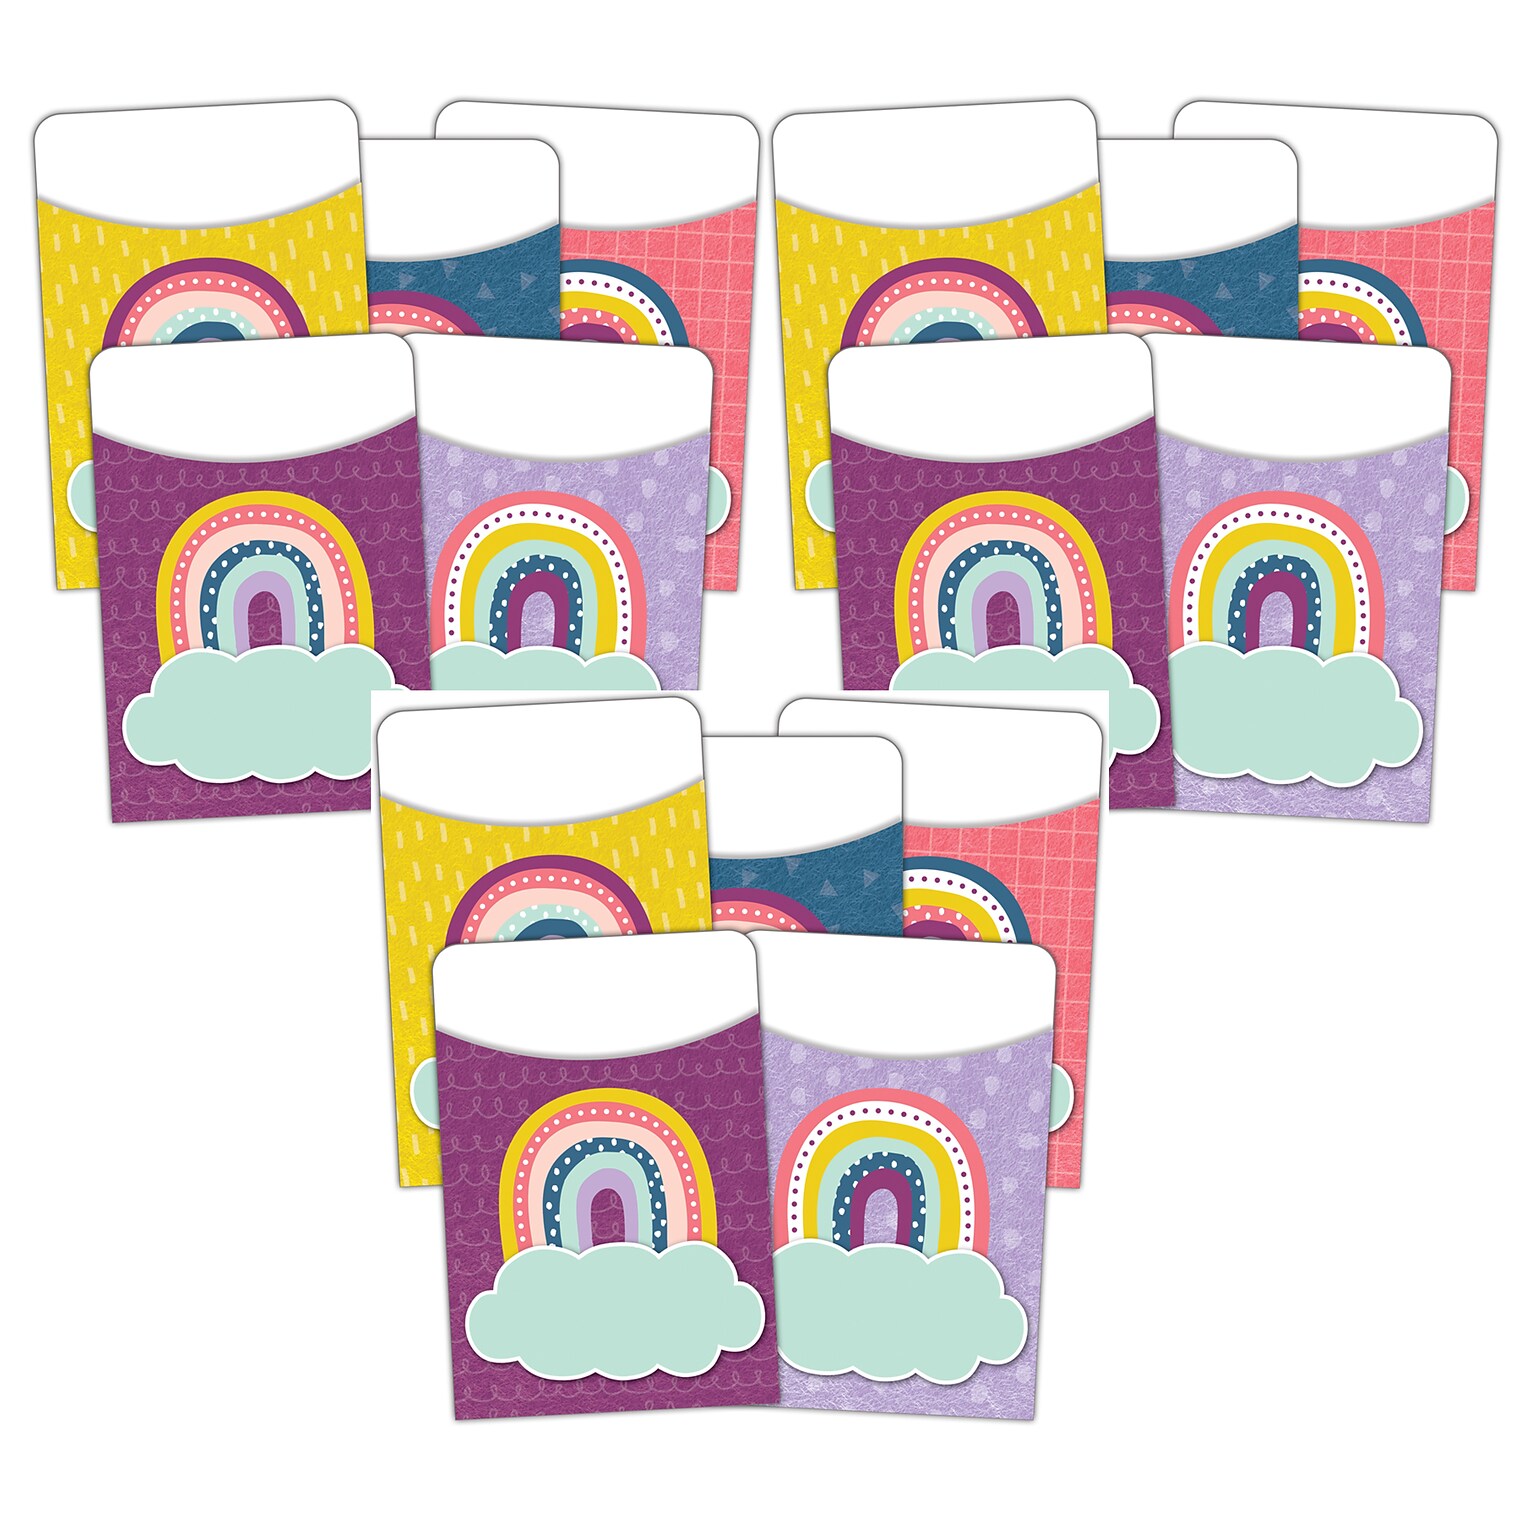 Teacher Created Resources® Oh Happy Day Library Pockets, 35 Per Pack, 3 Packs (TCR9061-3)